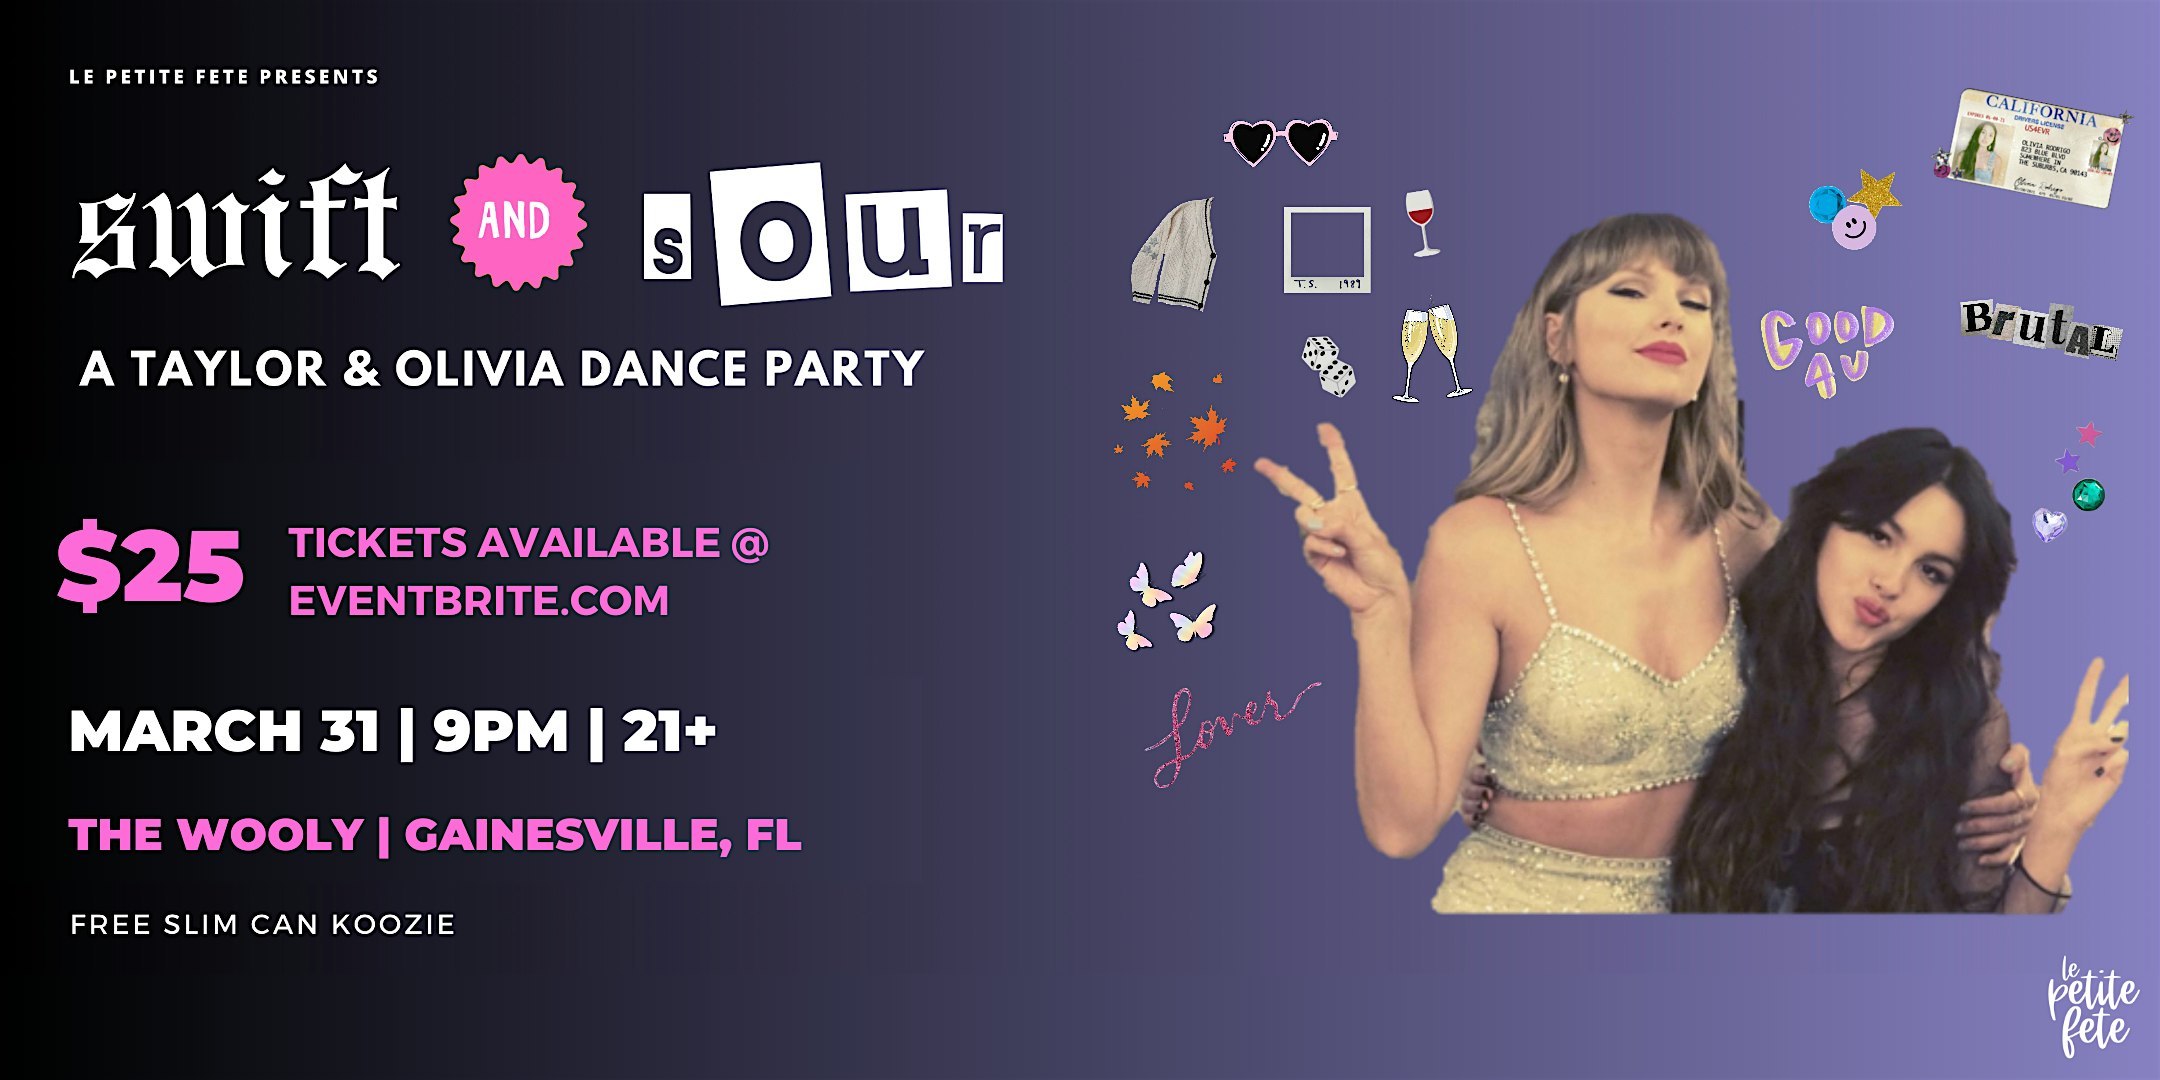 Swift & Sour: A Taylor and Olivia Inspired Dance Party in Gainesville at the Wooly